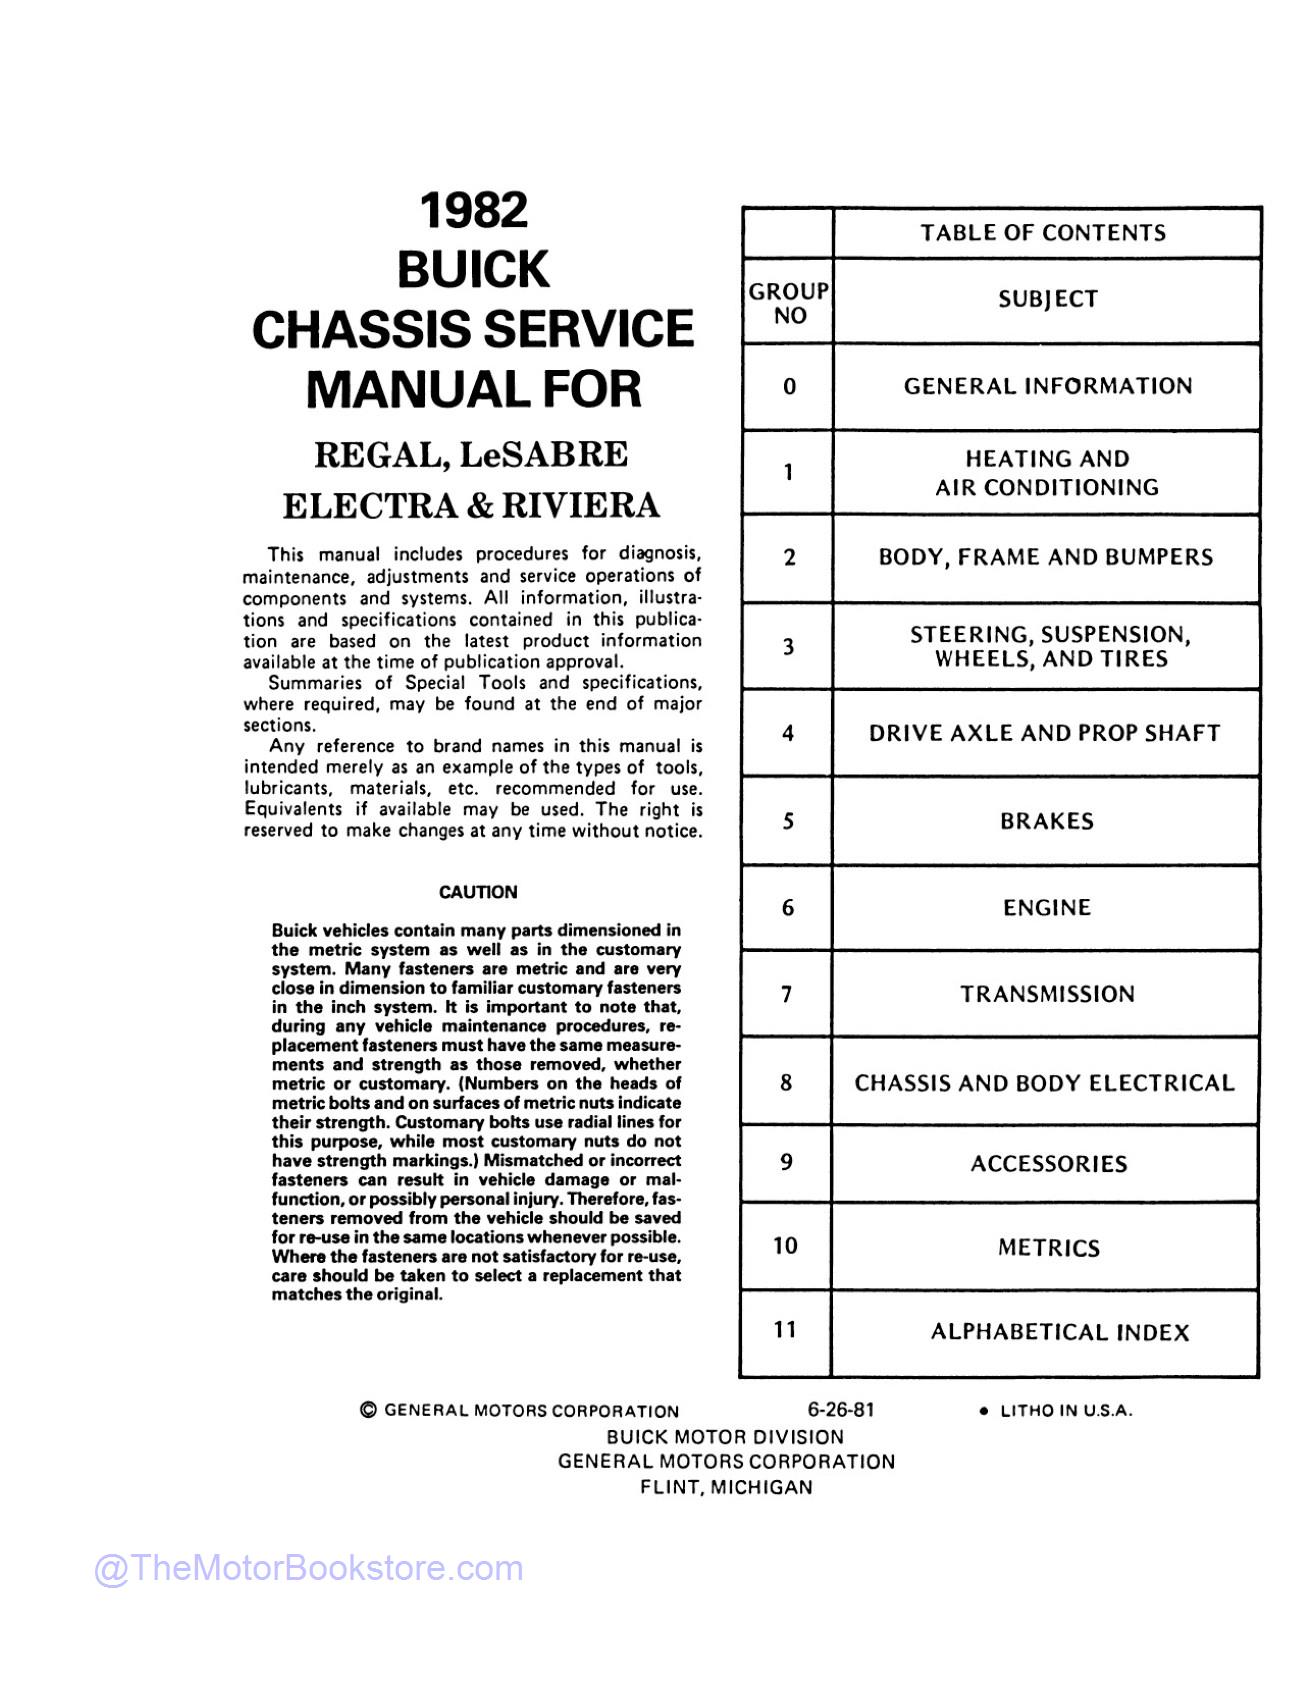 1982 Buick Chassis Service Manual - Regal, Grand National  - Table of Contents